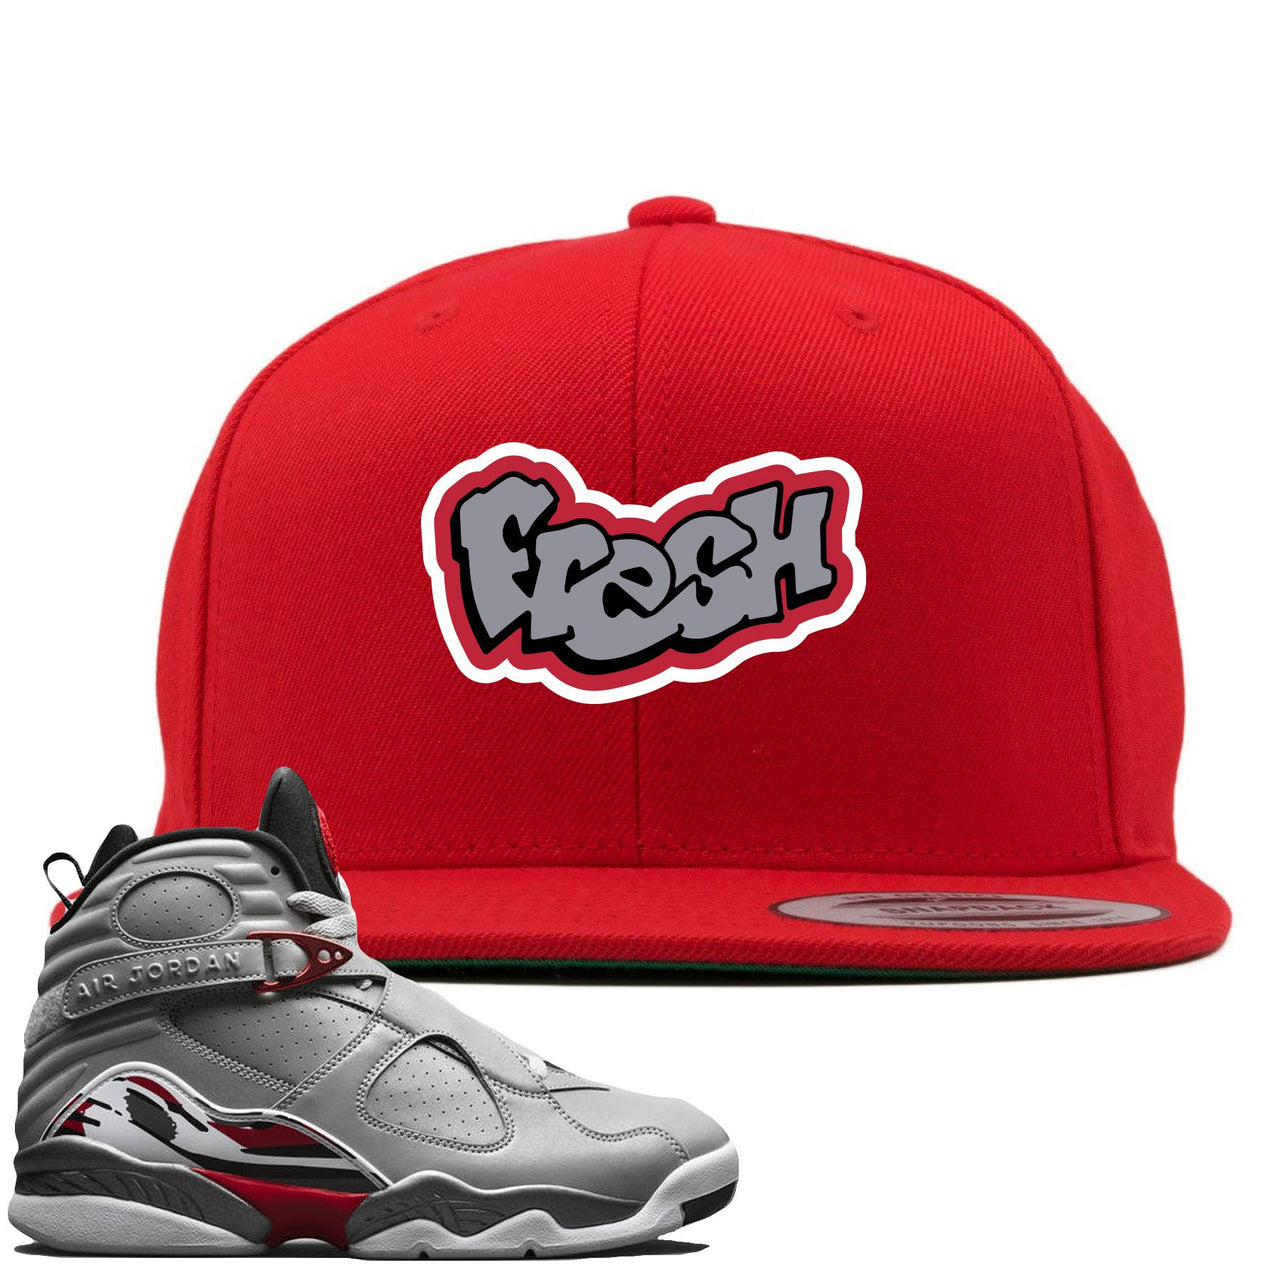 Reflections of a Champion 8s Snapback | Fresh Logo, Red